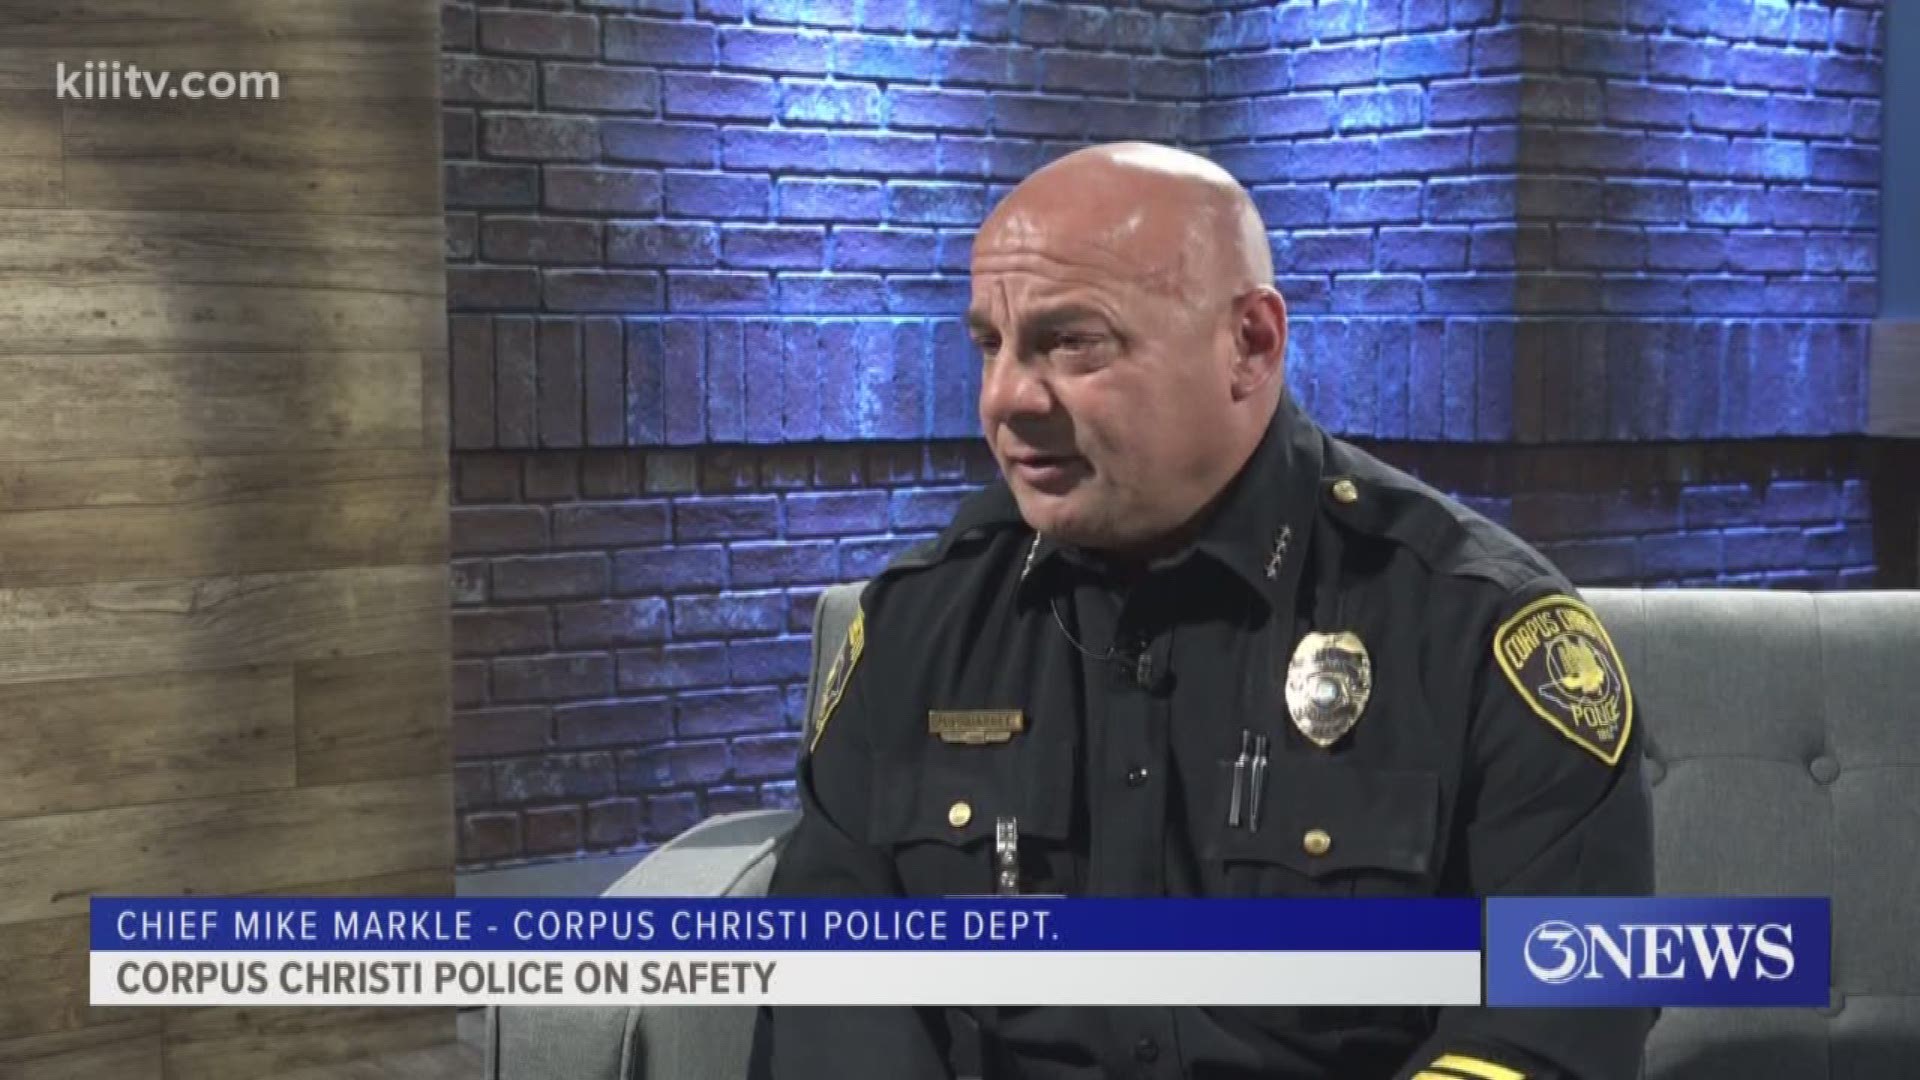 Chief Mike Markle advises people to be alert all times when entering anywhere with big crowds.